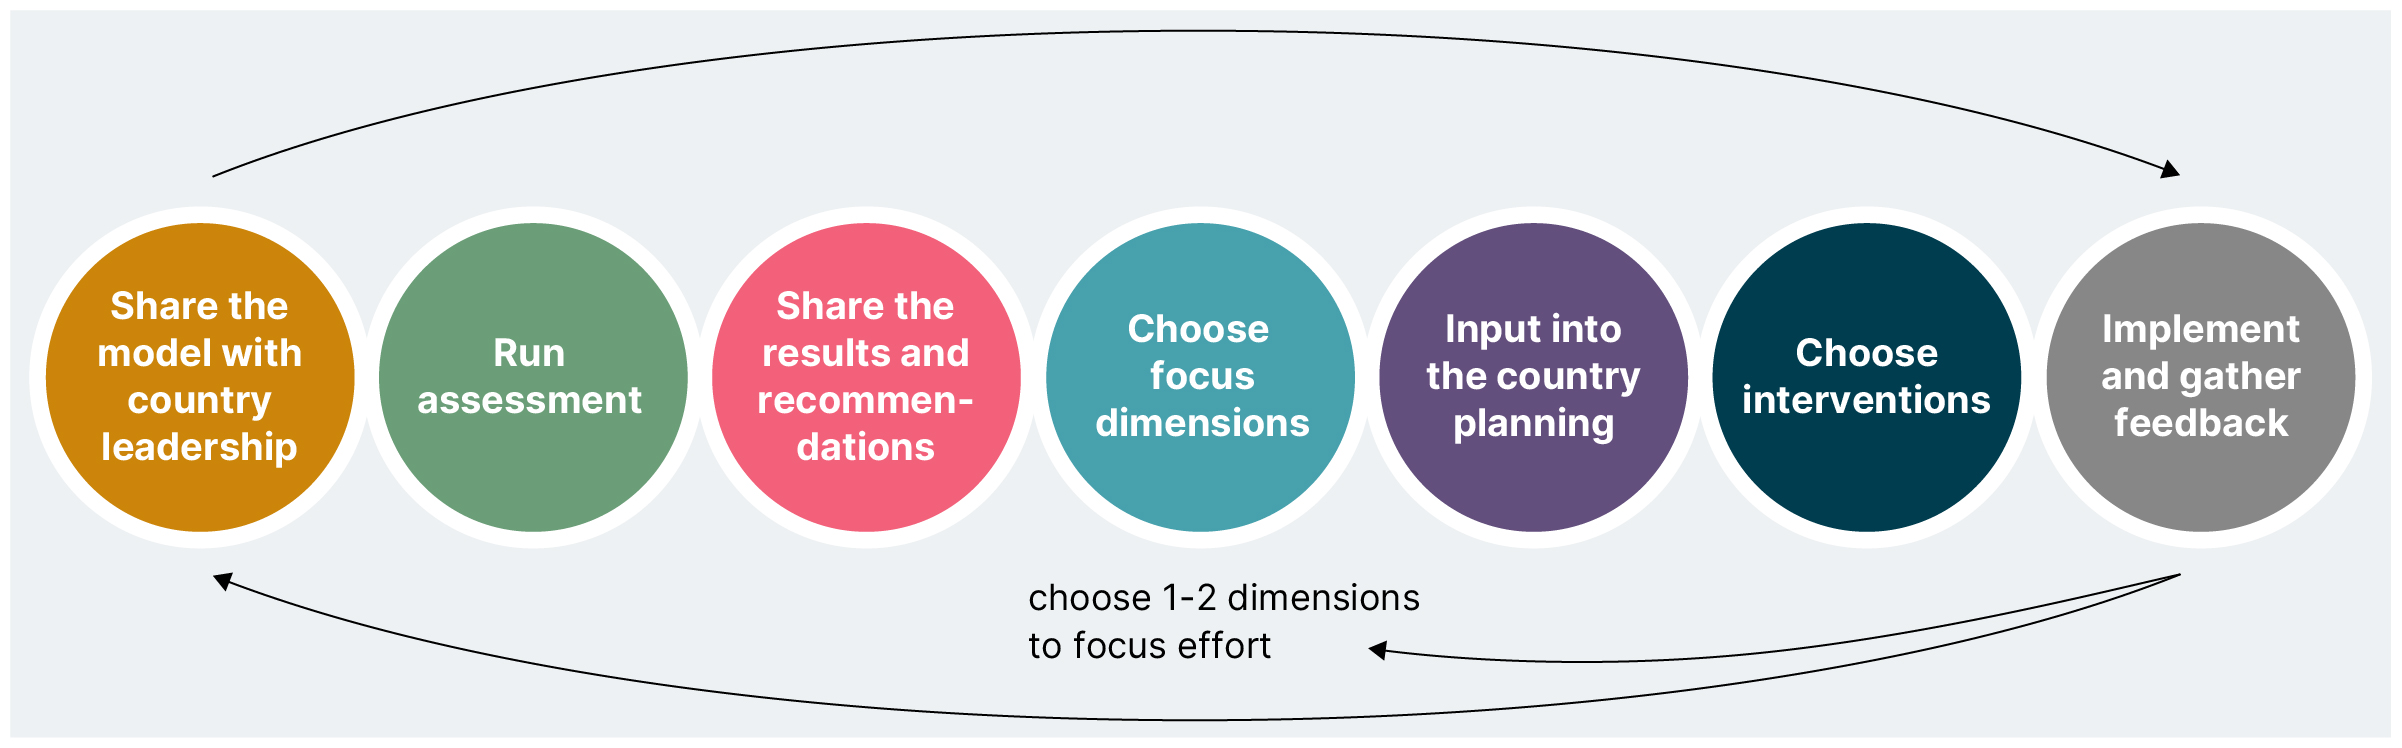 A row of circles representing a security feedback mechanism, starting with ‘share the model with country leadership’, followed by ‘run assessment’, ‘share the results and recommendations’, ‘choose focus dimensions’, ‘input into the country planning’, ‘choose interventions’, and finally ‘implement and gather feedback’. One arrow points directly from ‘share the model with country leadership’ to ‘ implement and gather feedback’. One arrow points from ‘implement and gather feedback’ back to the beginning, and one arrow points towards the middle of the row to suggest choosing 1-2 dimensions to focus effort on.